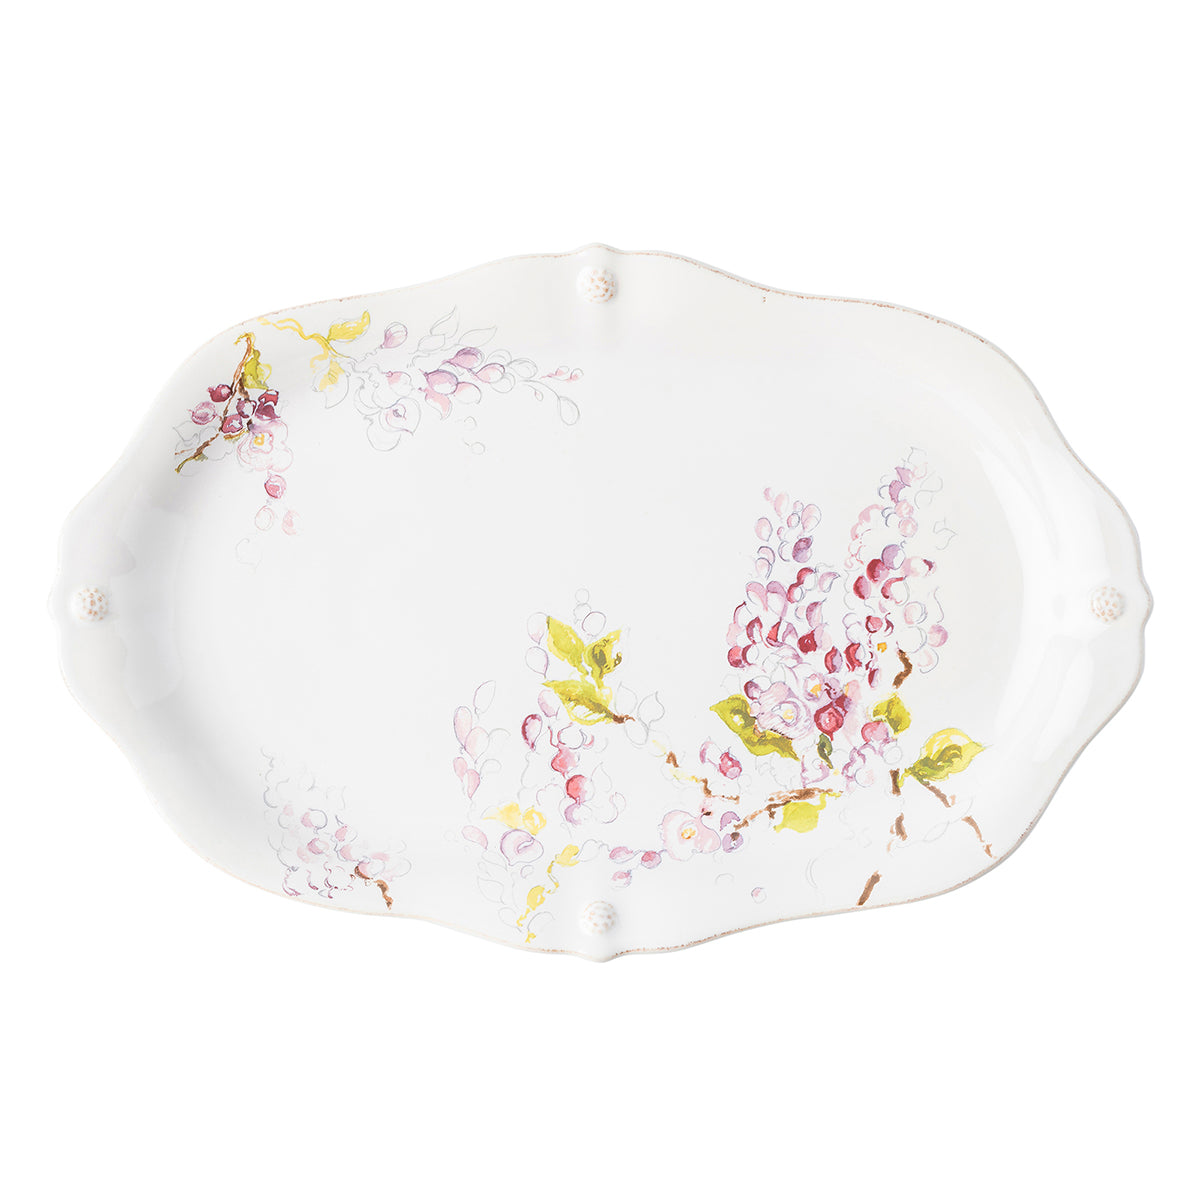 Berry & Thread Floral Sketch 16" Wisteria Platter